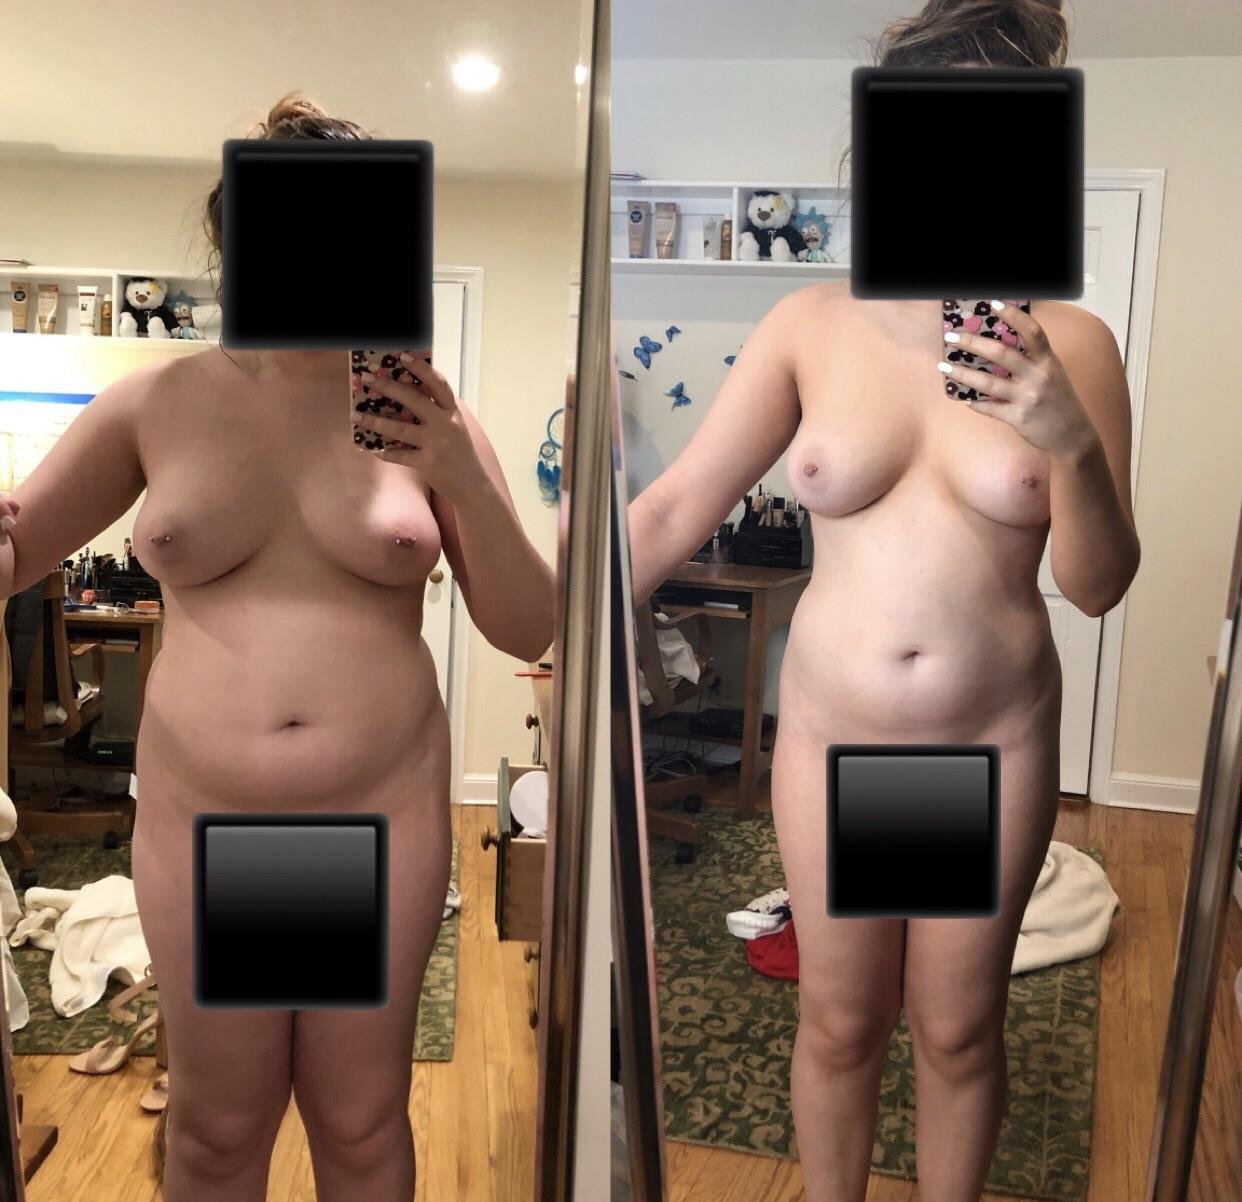 F/22/5’4” 161&gt;144=17lbs. Trying to remind myself how far I’ve come and avoid binging. Still have 24lbs to go.